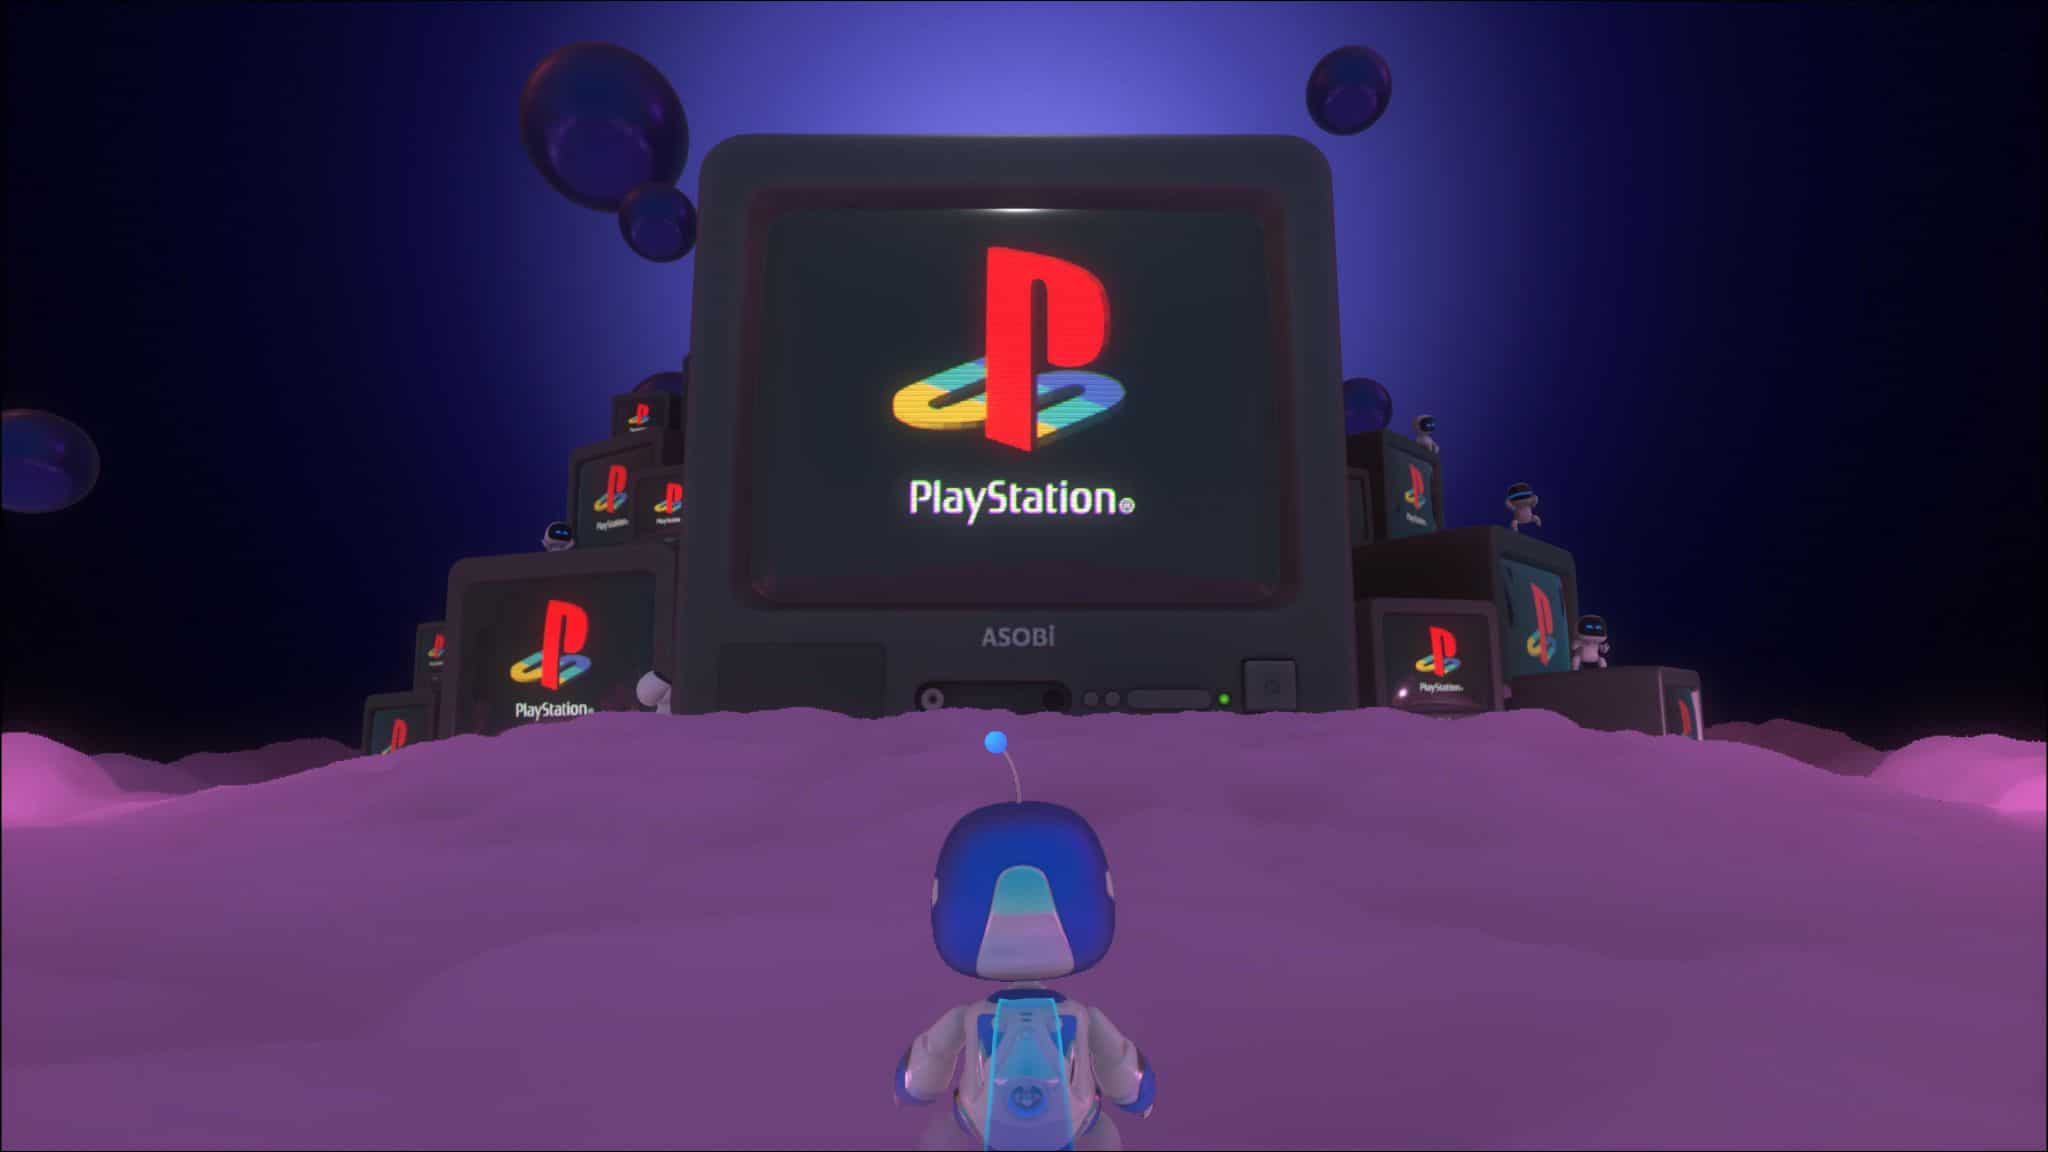 ASTRO's Playroom - PS5 Games